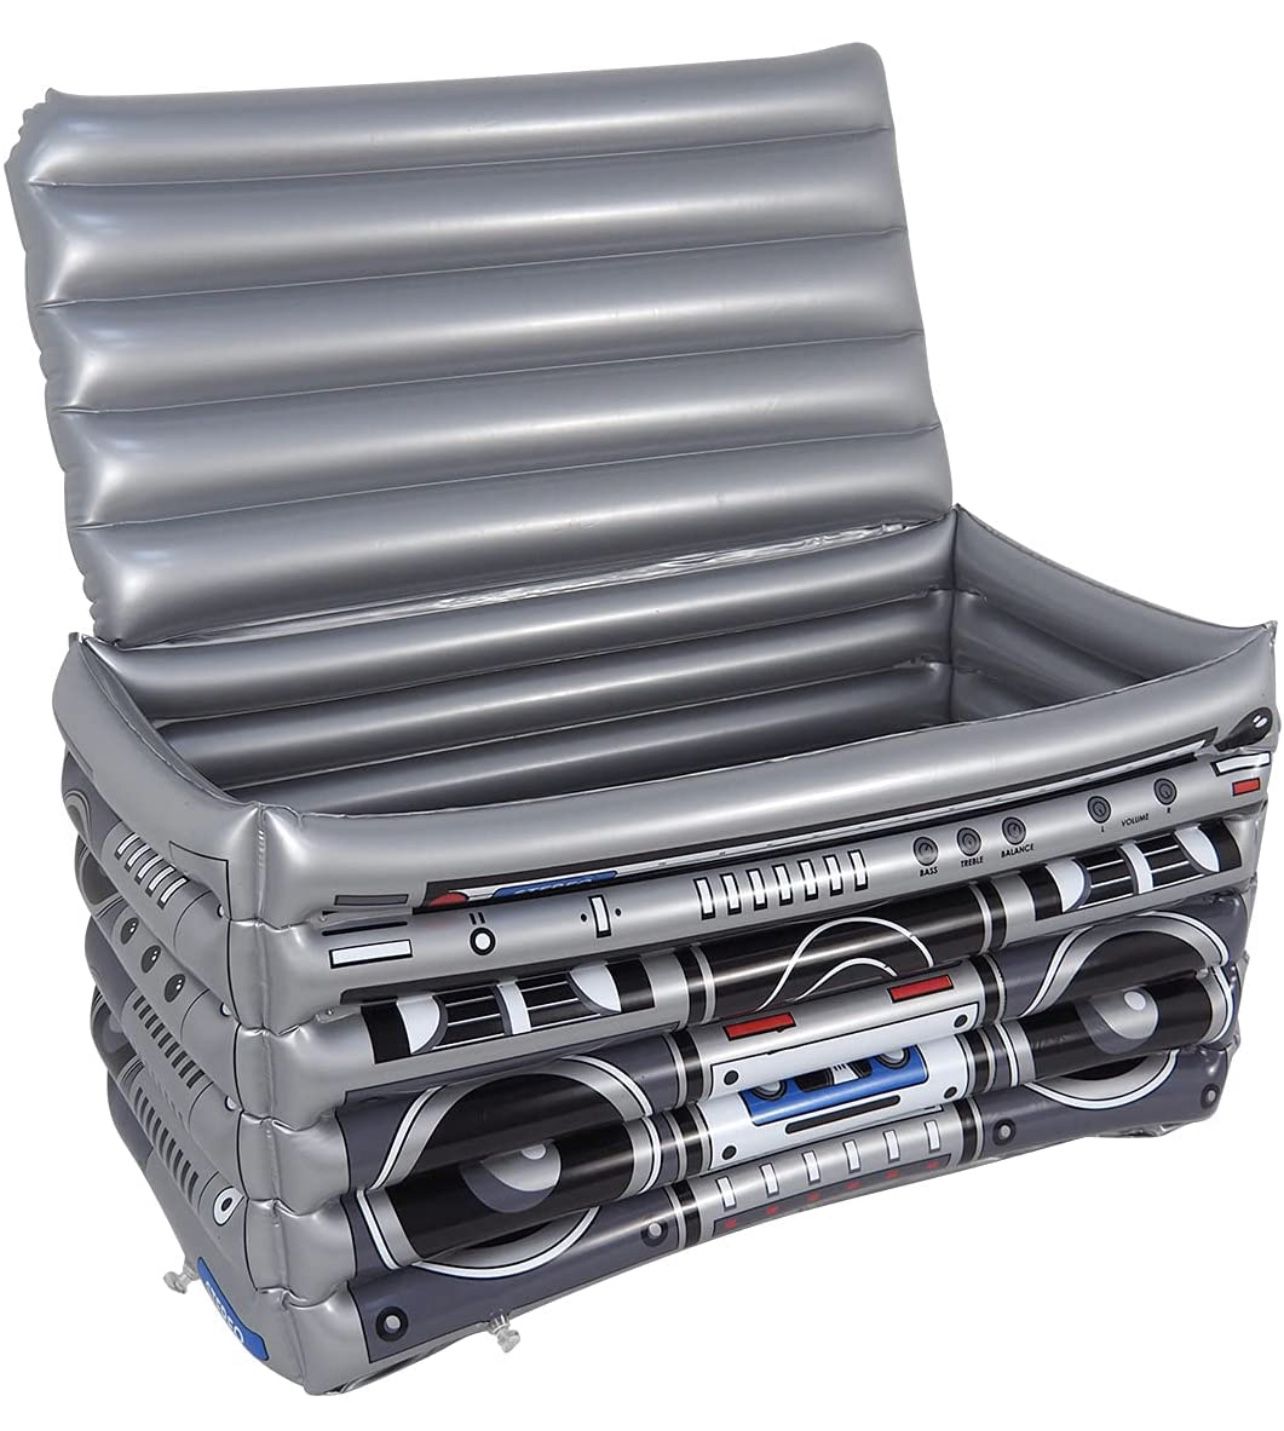 Boom Box Beverage Ice Bucket, Inflatable Cooler for Pool Camping BBQ, 80's Theme Retro Party Decor,Large Drink Floating ,Food Small Ice Chest,Birthday